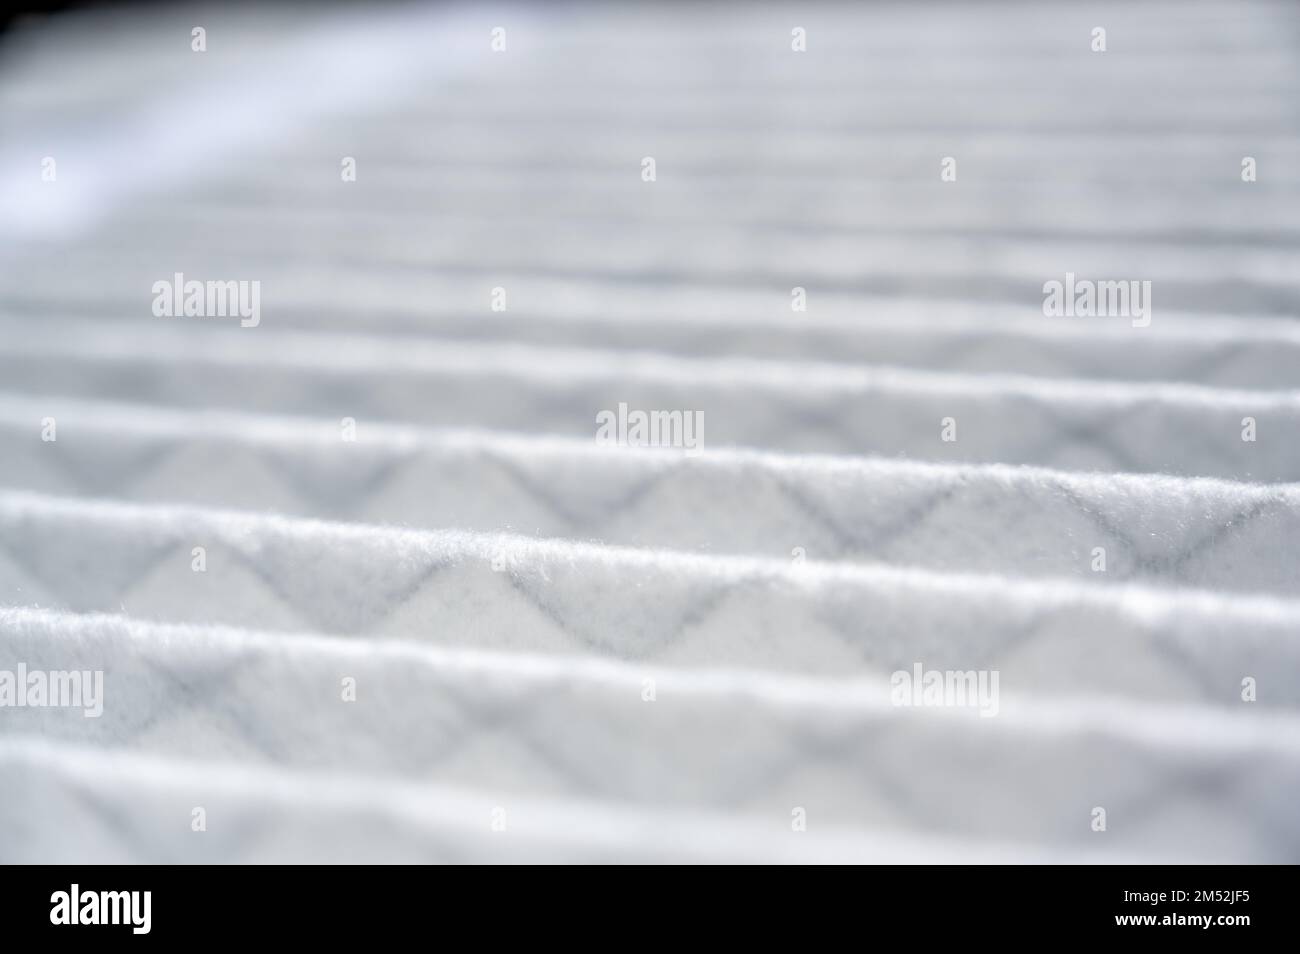 Selective focus on section of a new white and clean residential air filter Stock Photo